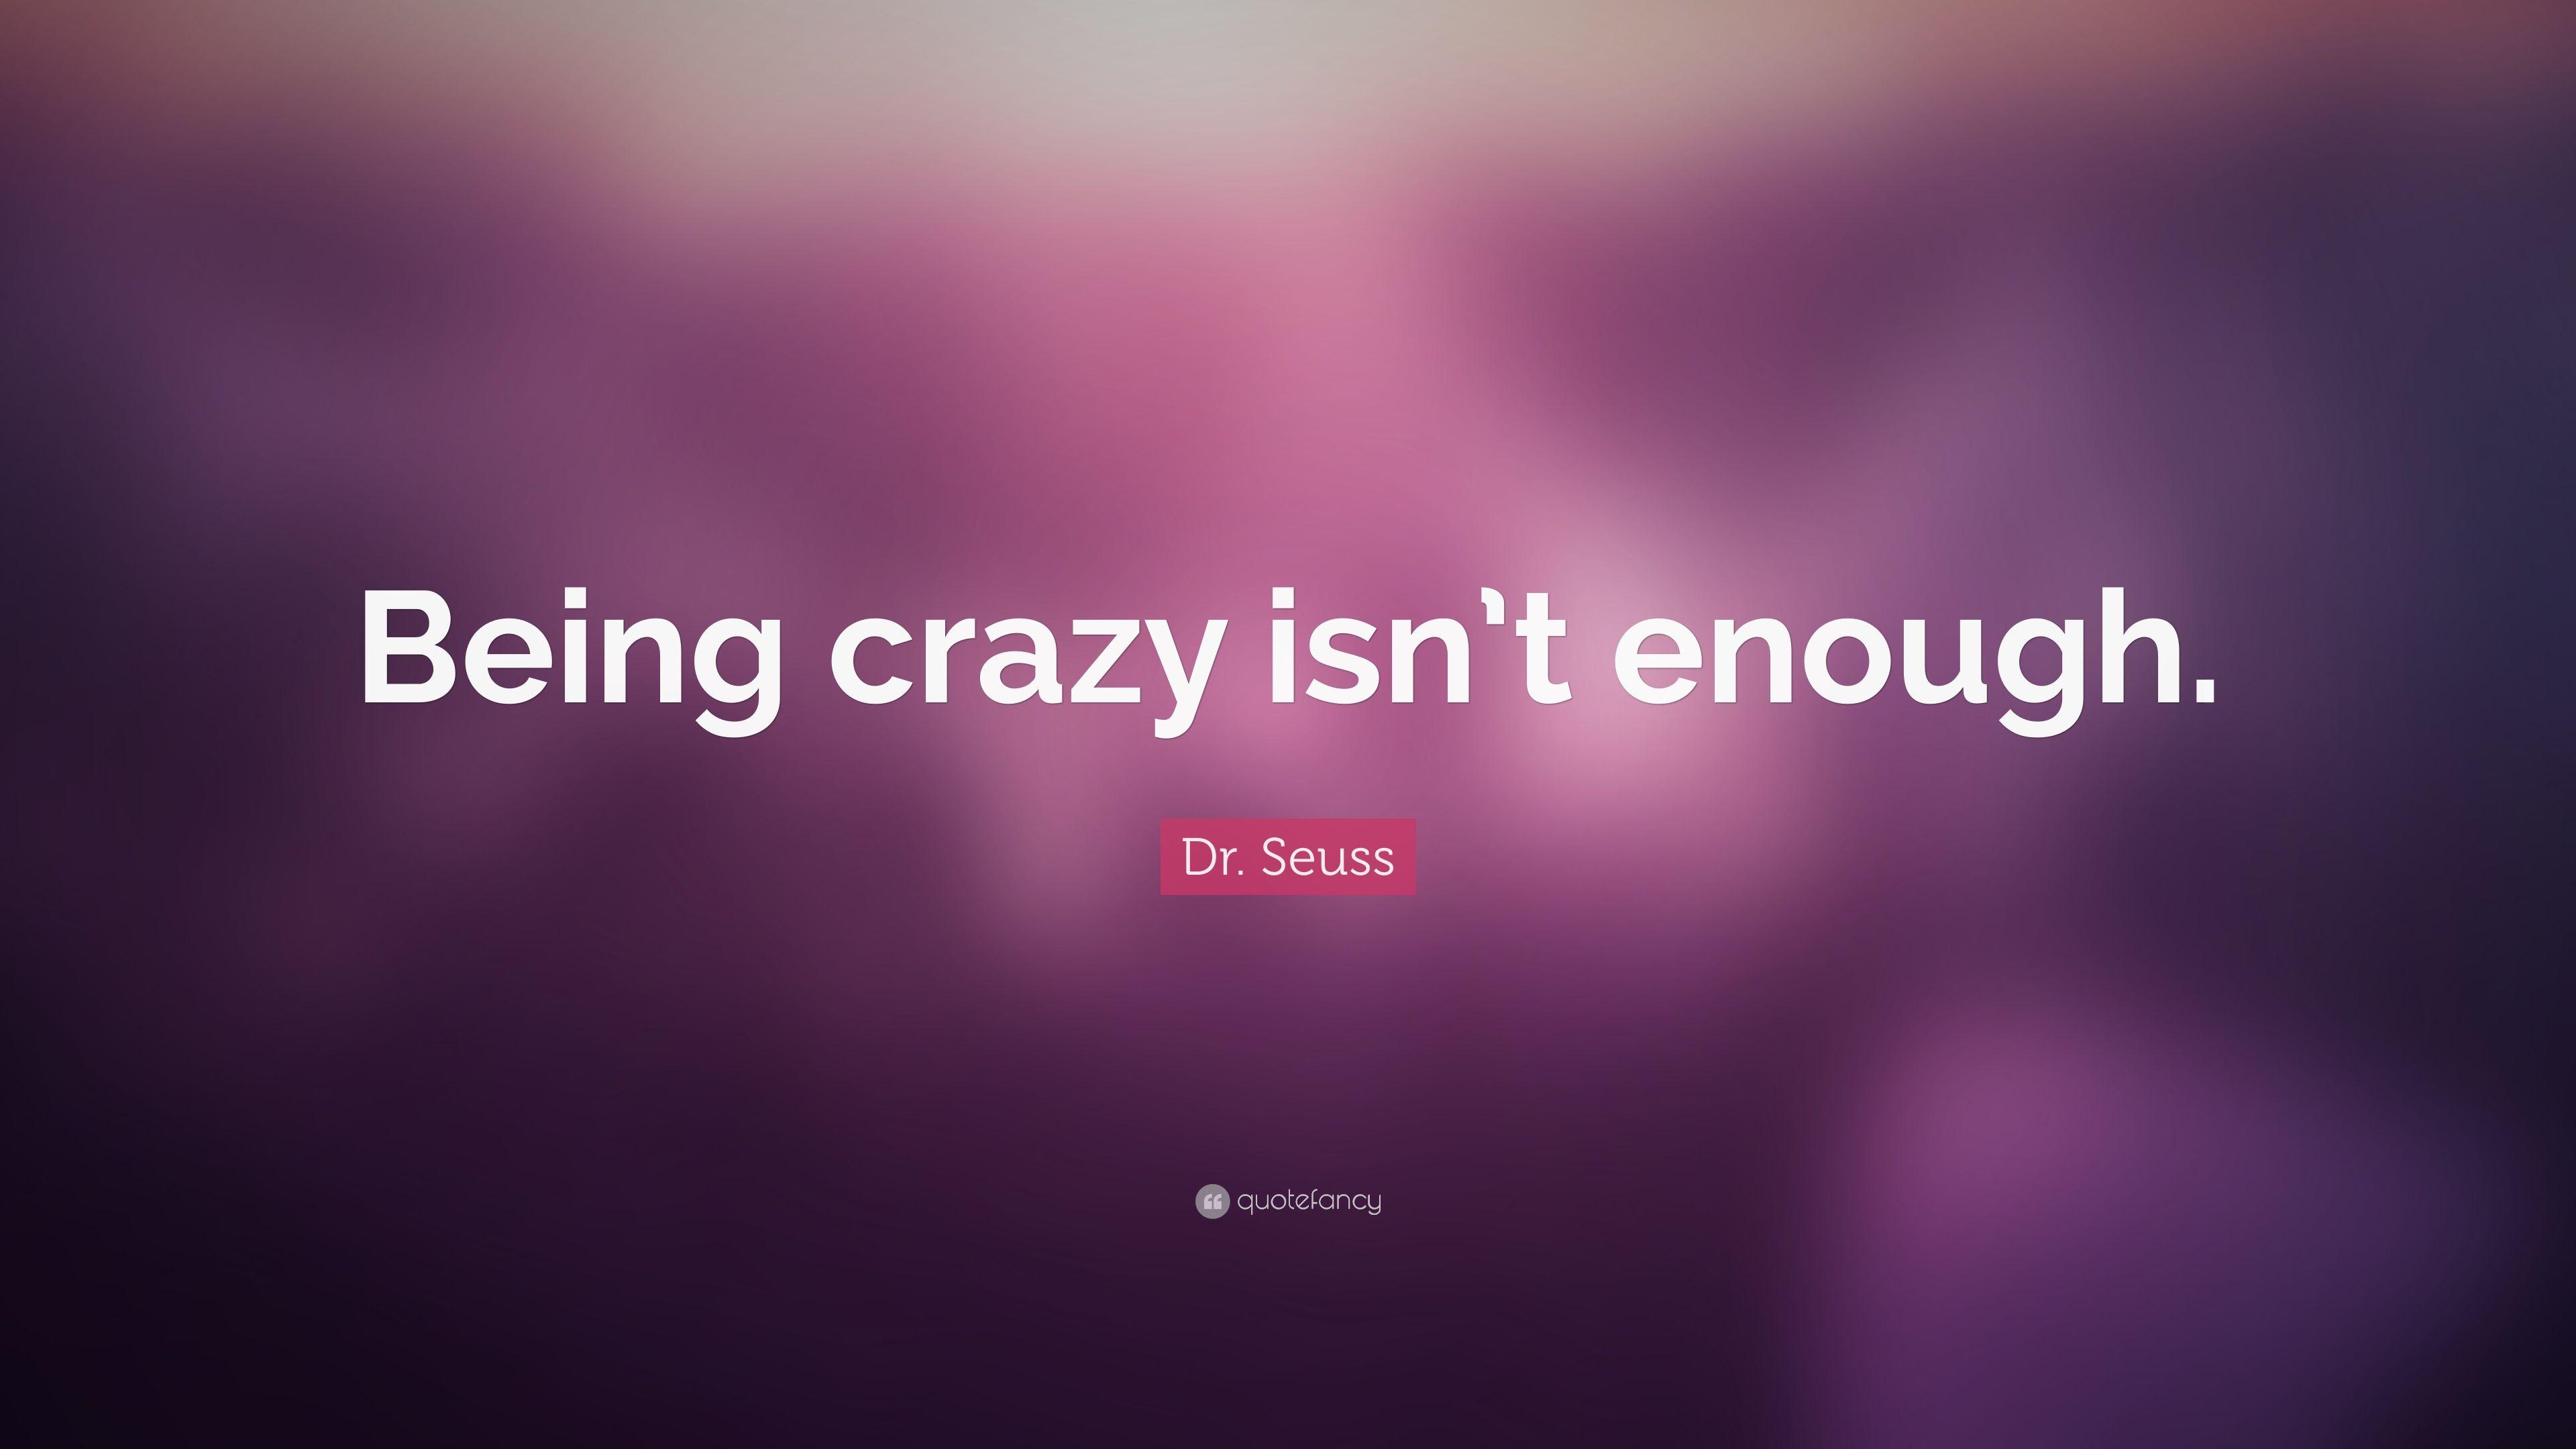 Dr. Seuss Quote: “Being crazy isn't enough.”